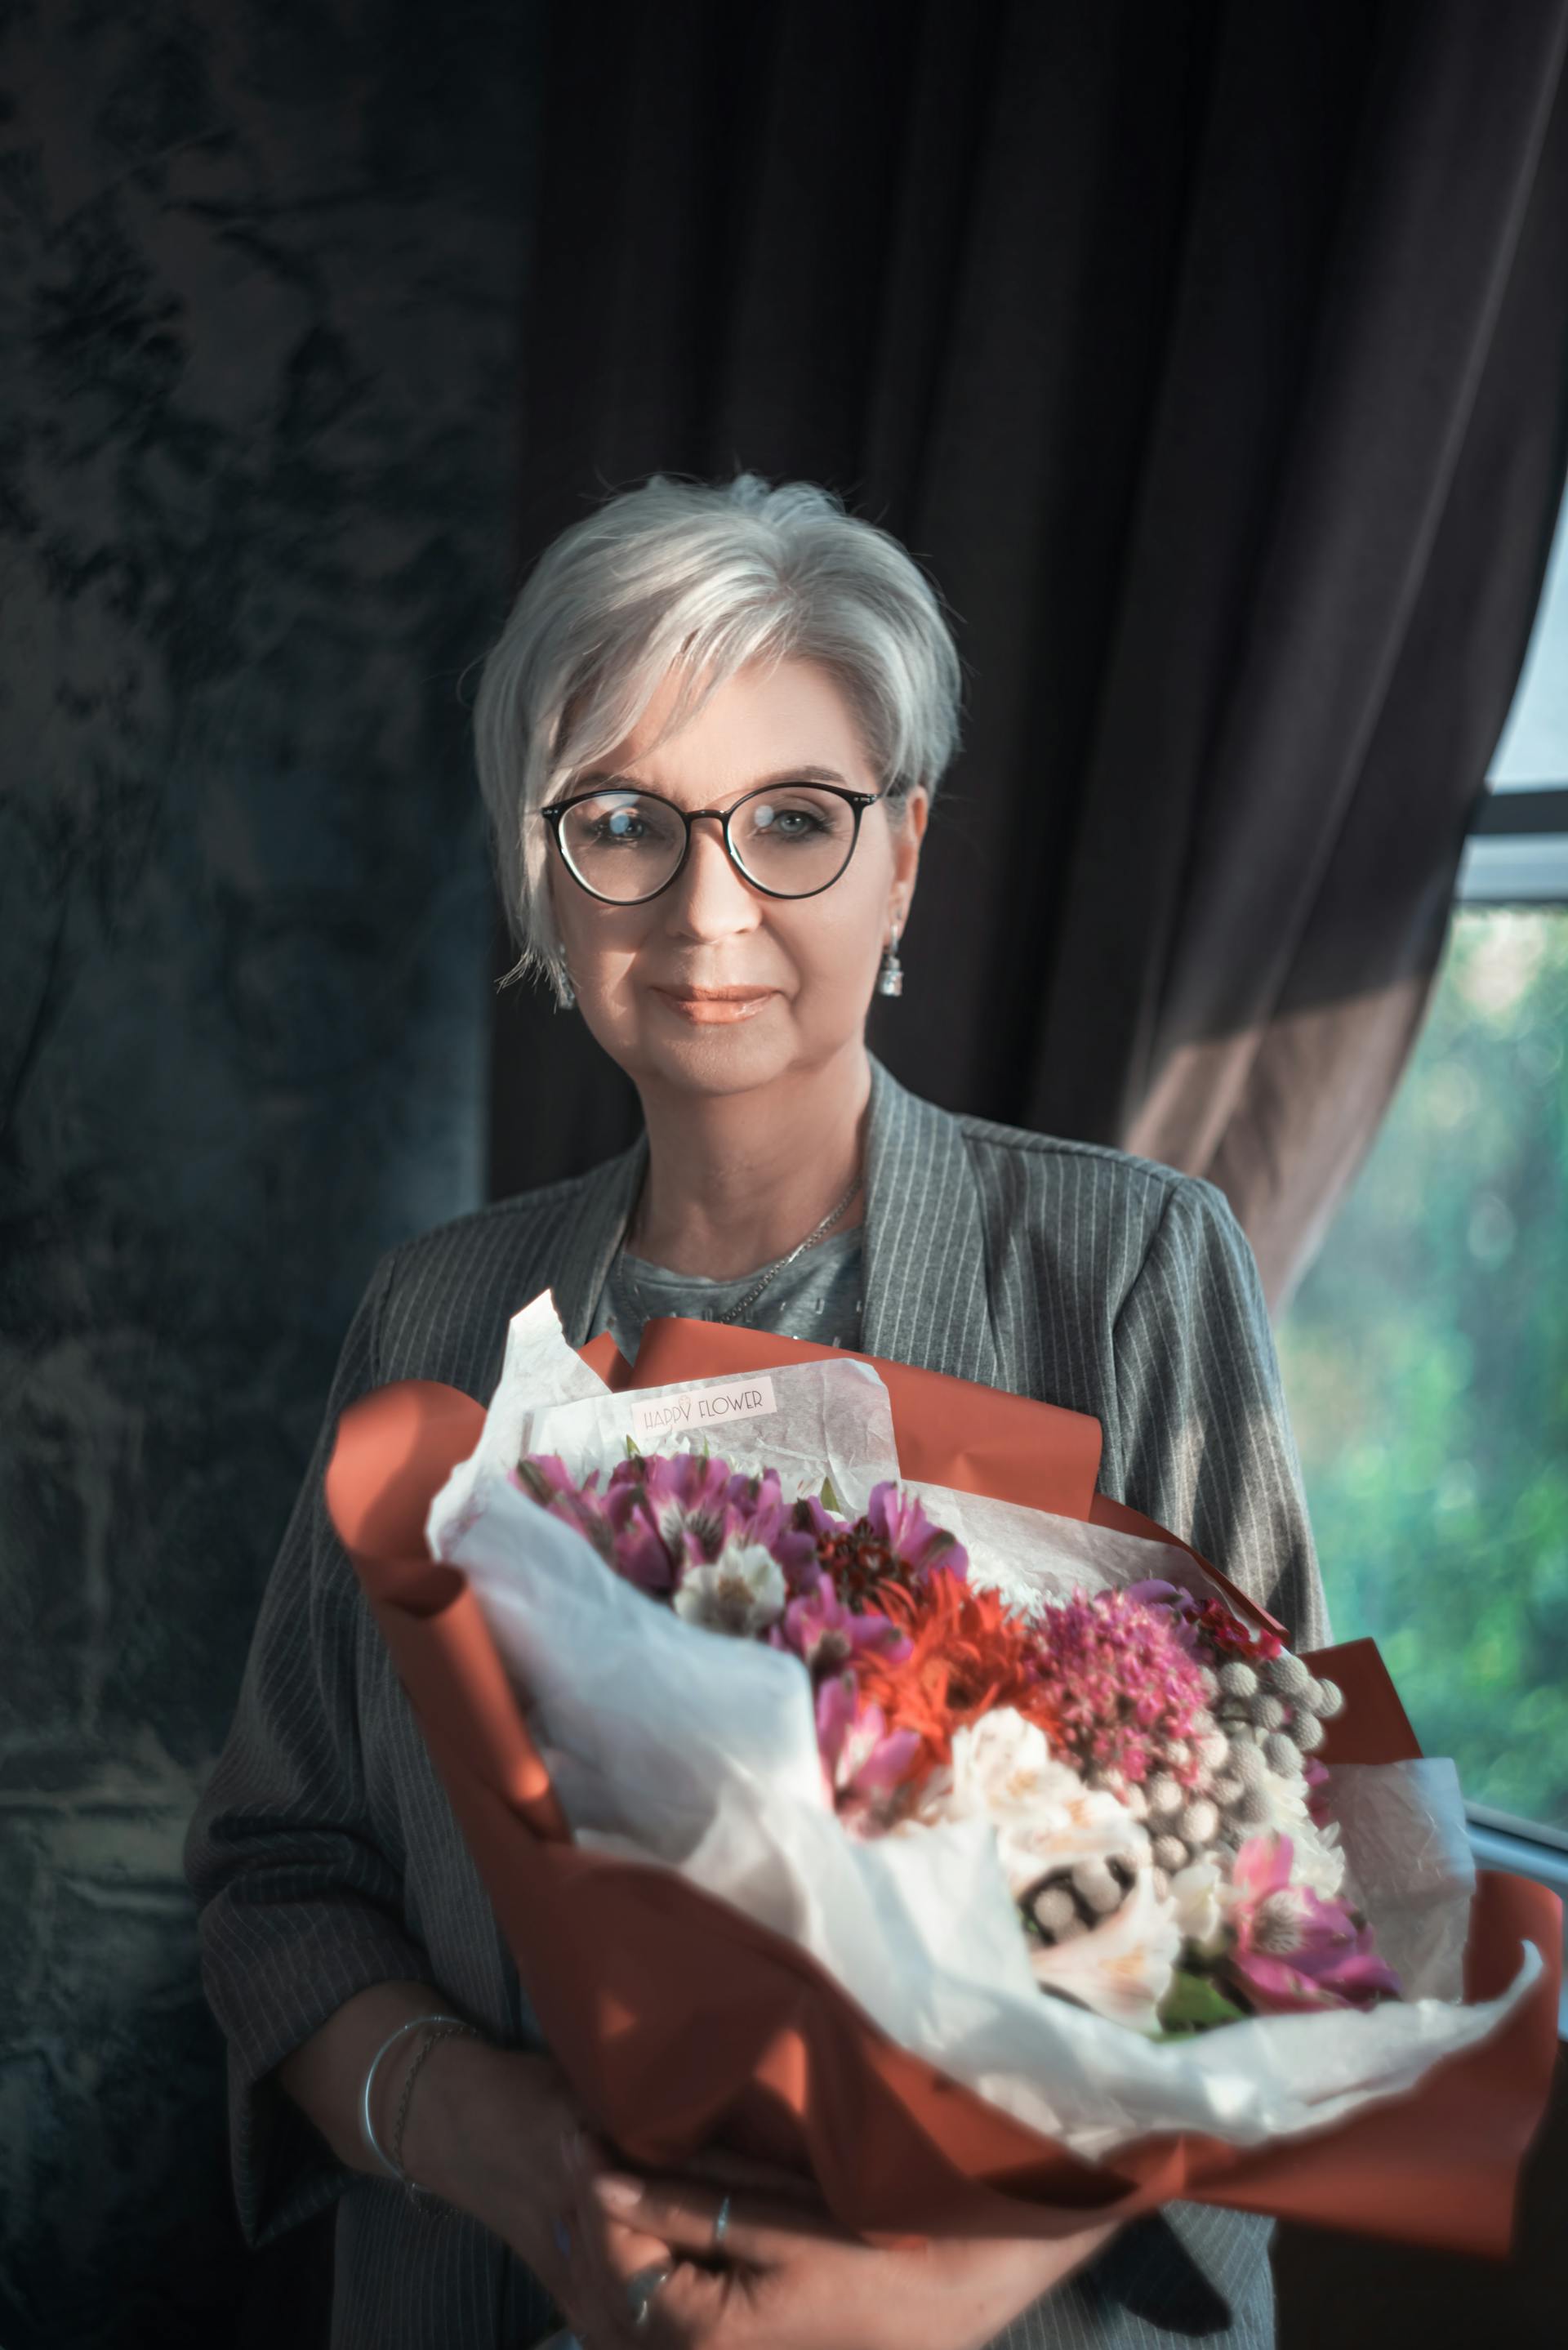 A smiling woman holding a bouquet of flowers | Source: Pexels